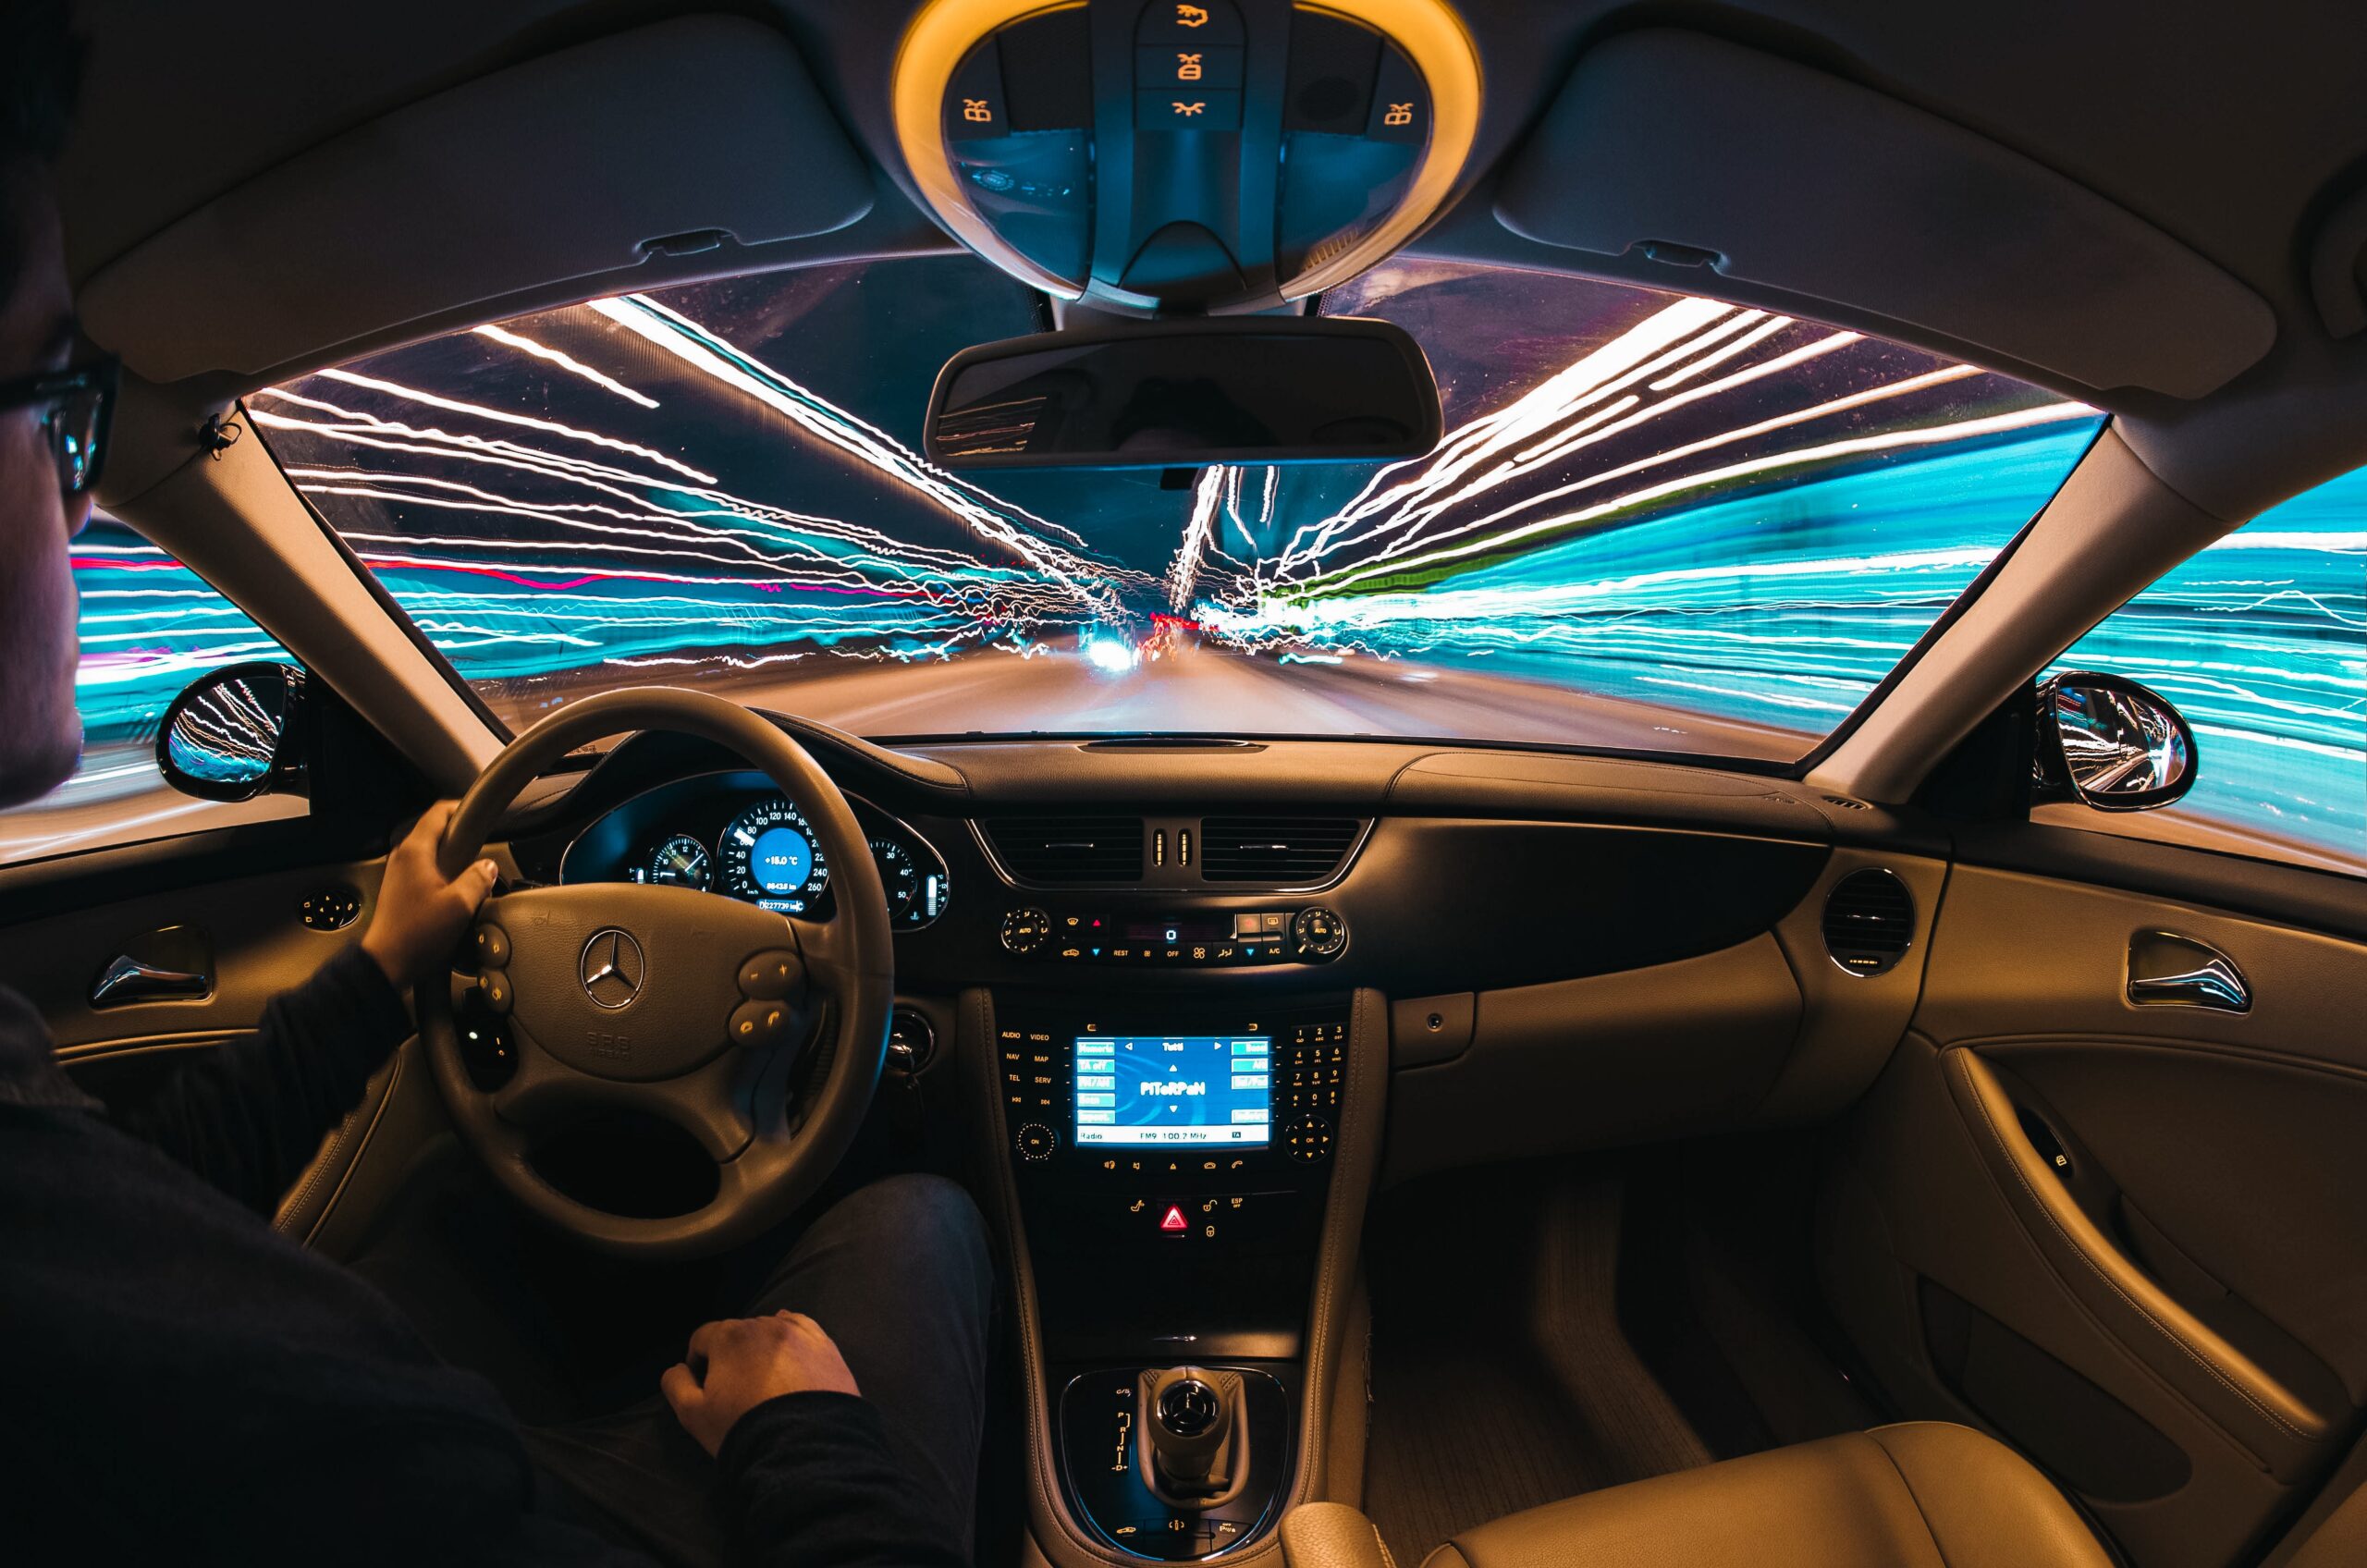 Time lapsed image from inside a car